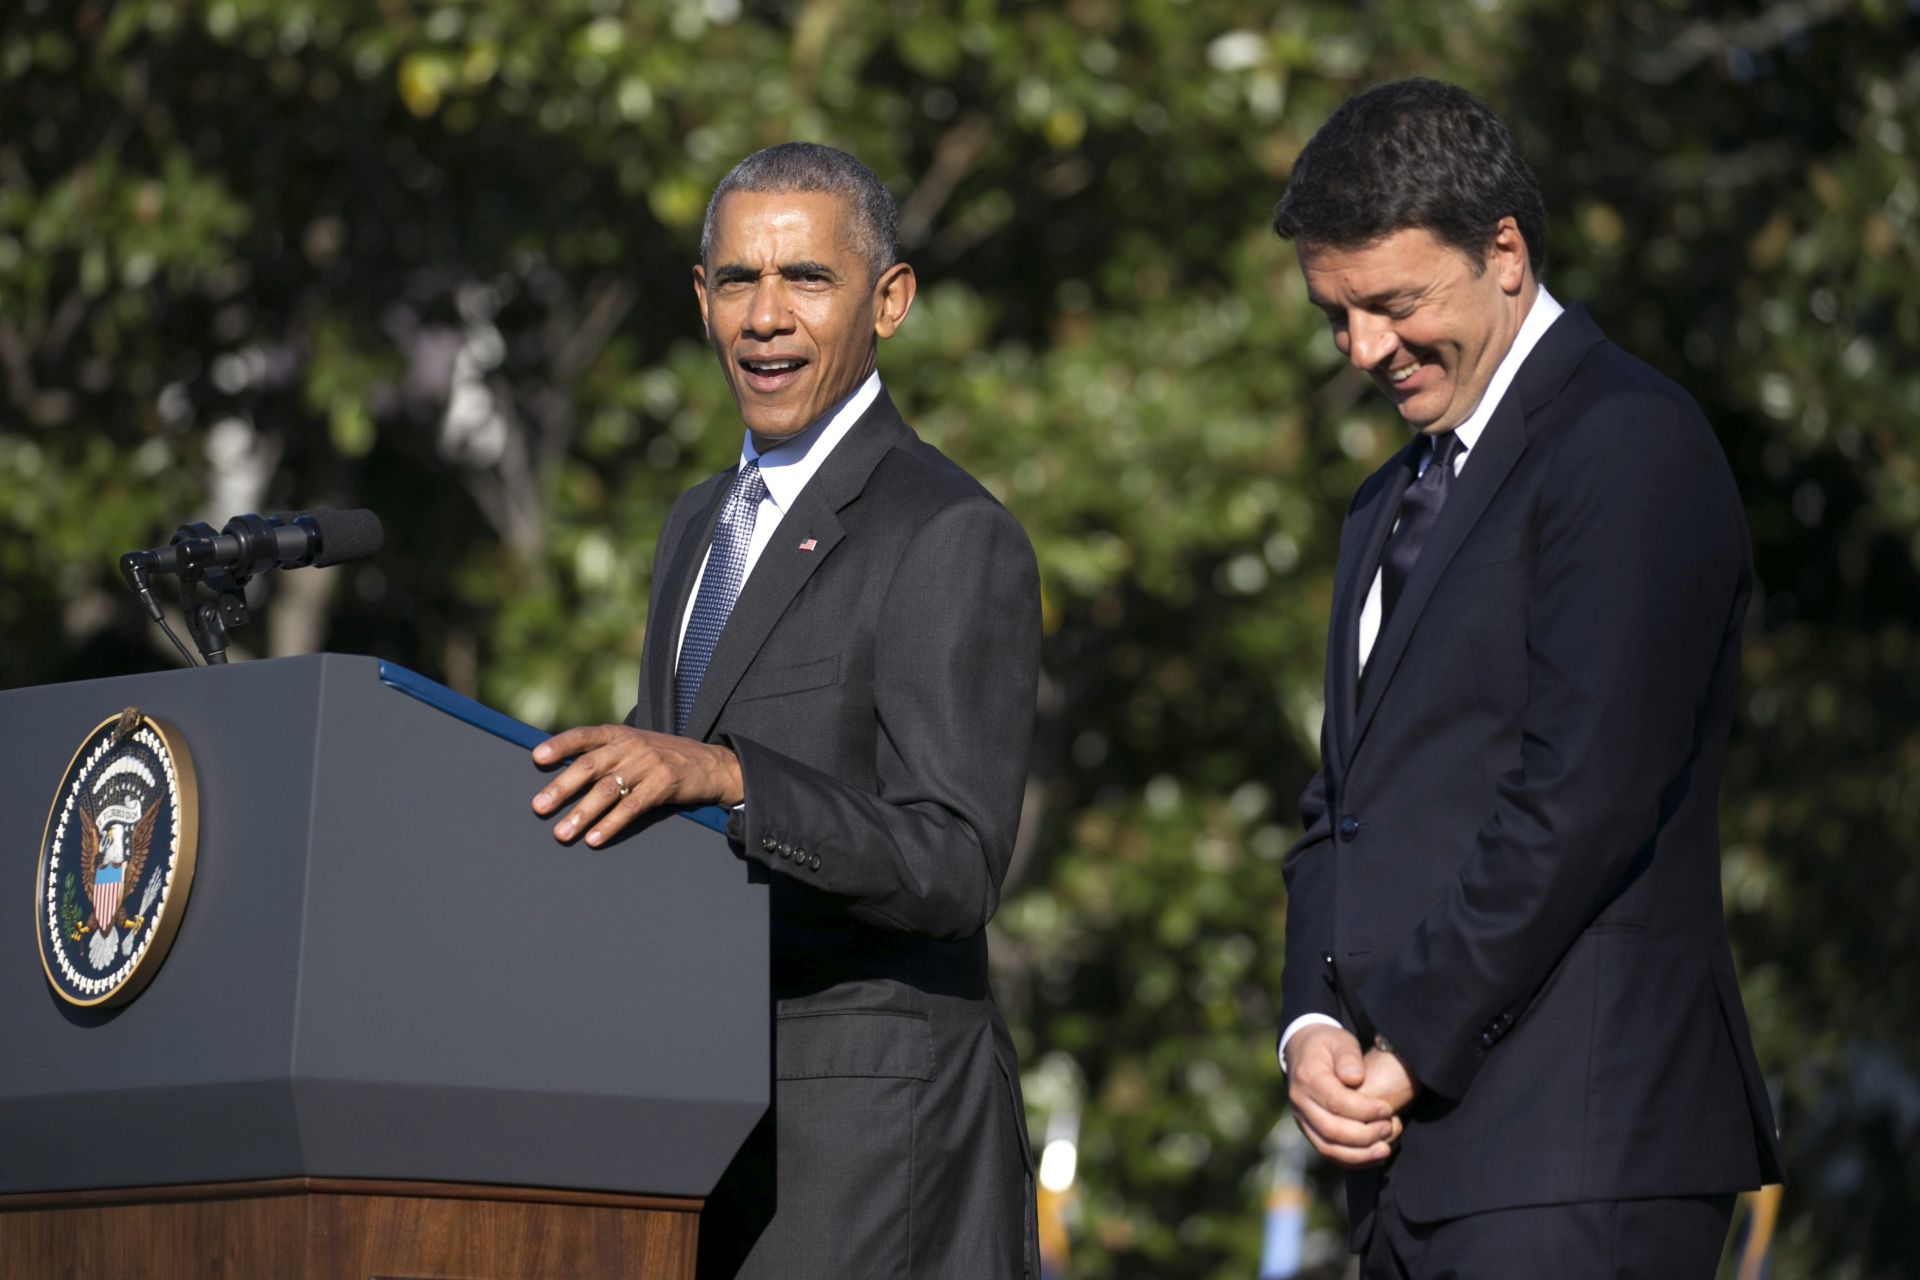 epa05590797 US President Barack Obama (L) and Italian Prime Minister Matteo Renzi (R)participate in an official arrival ceremony on the South Lawn of the White House in Washington DC, USA, 18 October 2016. Later today President Obama and First Lady Michelle Obama will host their final state dinner featuring celebrity chef Mario Batali and singer Gwen Stefani performing after dinner.  EPA/SHAWN THEW